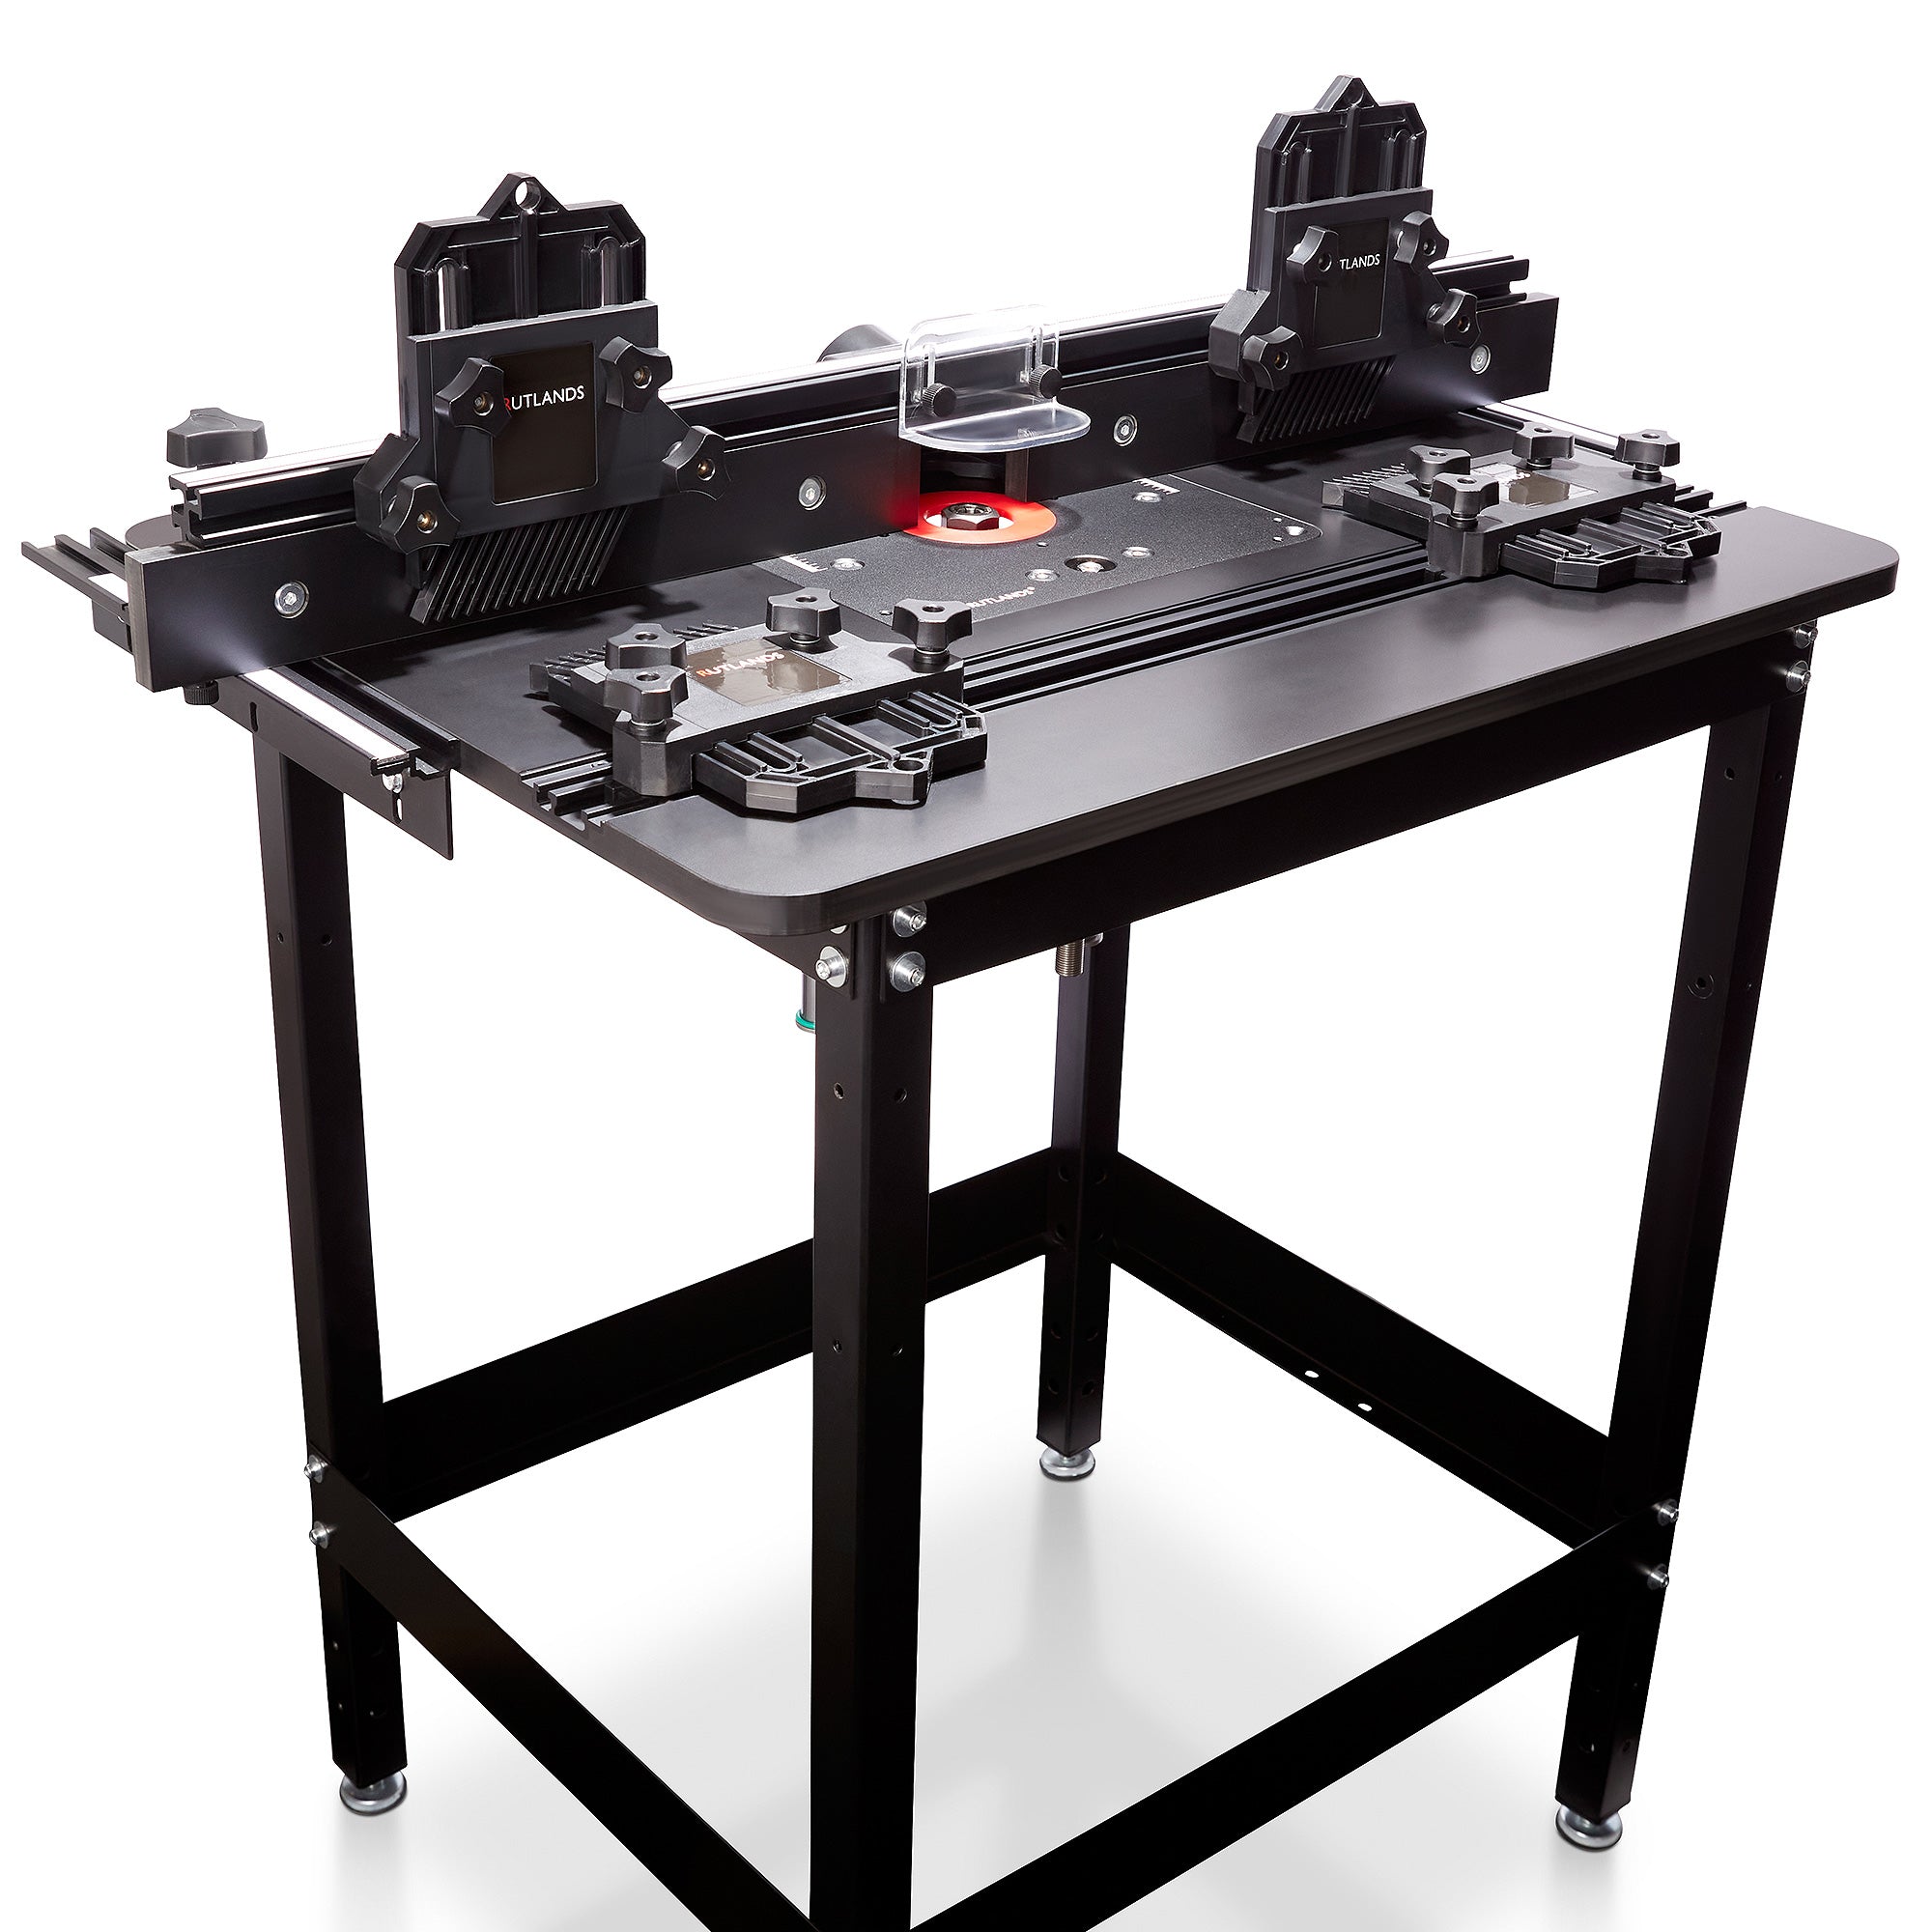 Phenolic Router Table - R15 Lift and Motor